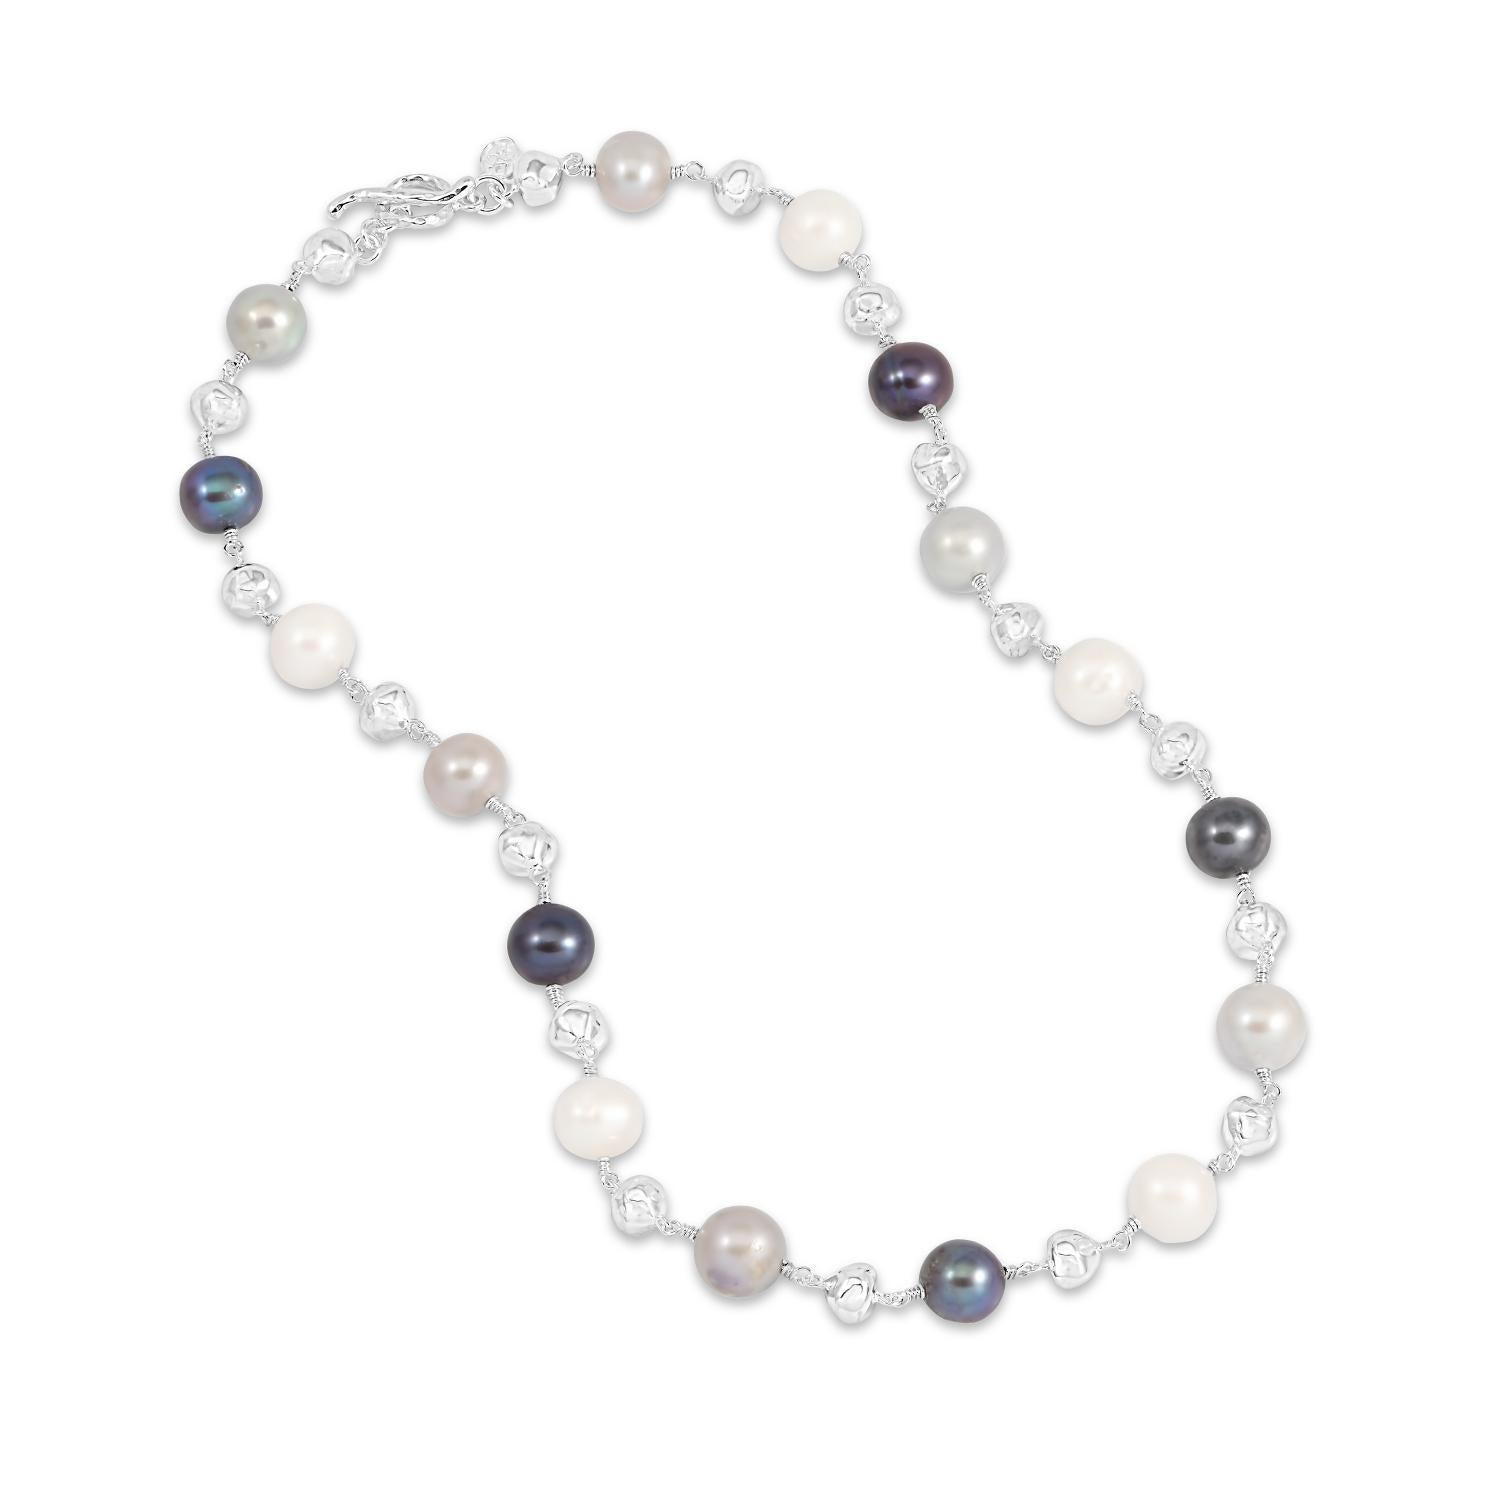 From our Luna Pearls range, this necklace features mixed cultured freshwater pearls in white, dove grey and peacock shades, interspaced with 7 sterling silver nuggets. The 5mm nuggets have a soft beaten finish, giving the necklace an organic yet